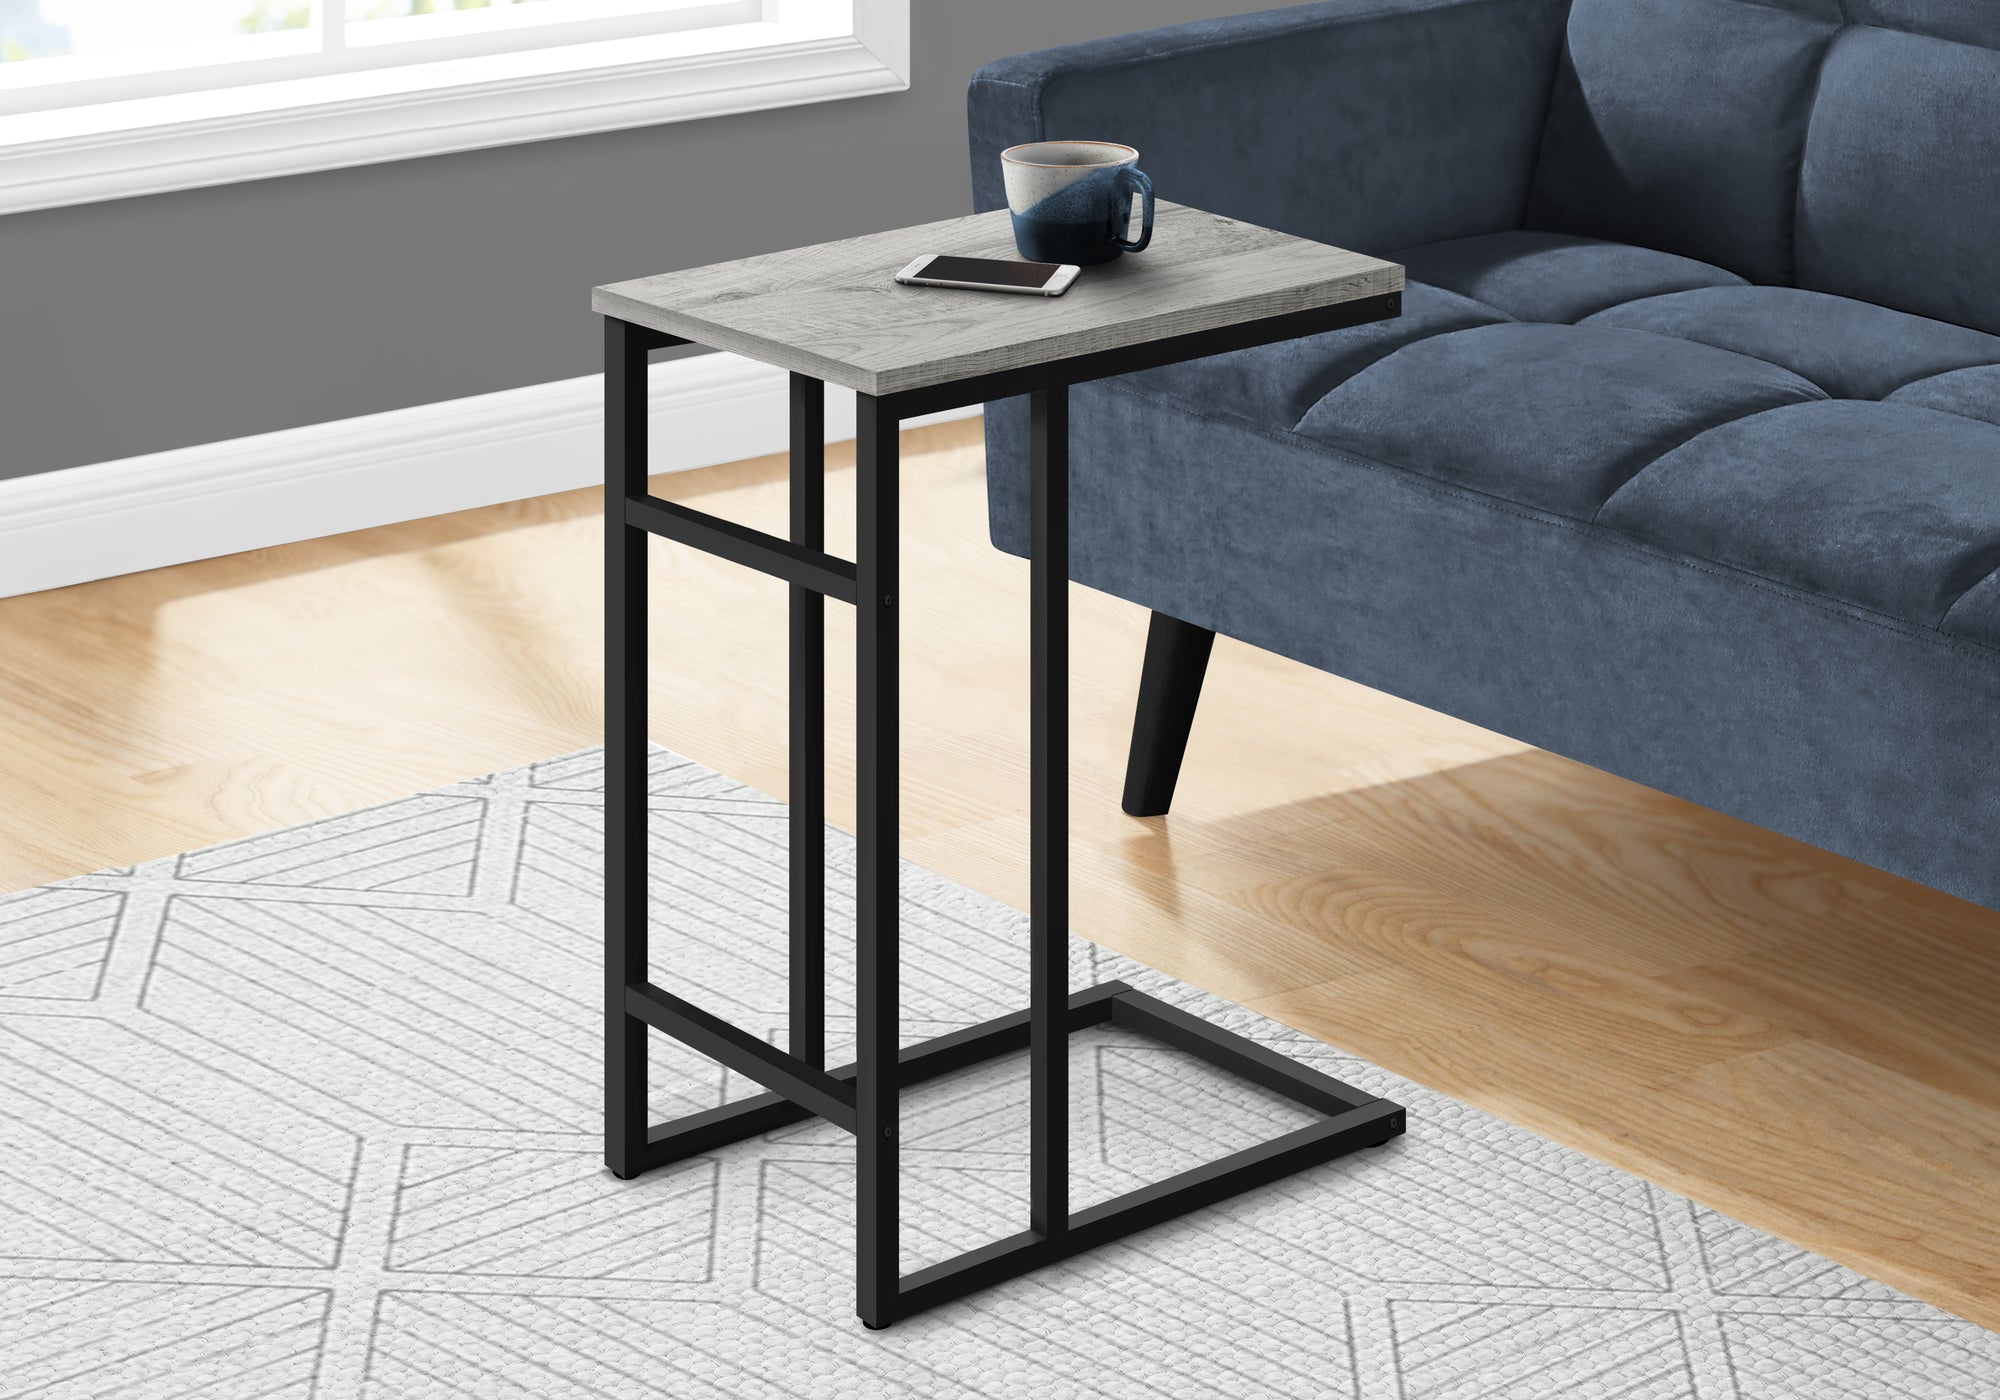 MN-382171    Accent Table - 24"H, Grey, Black Metal